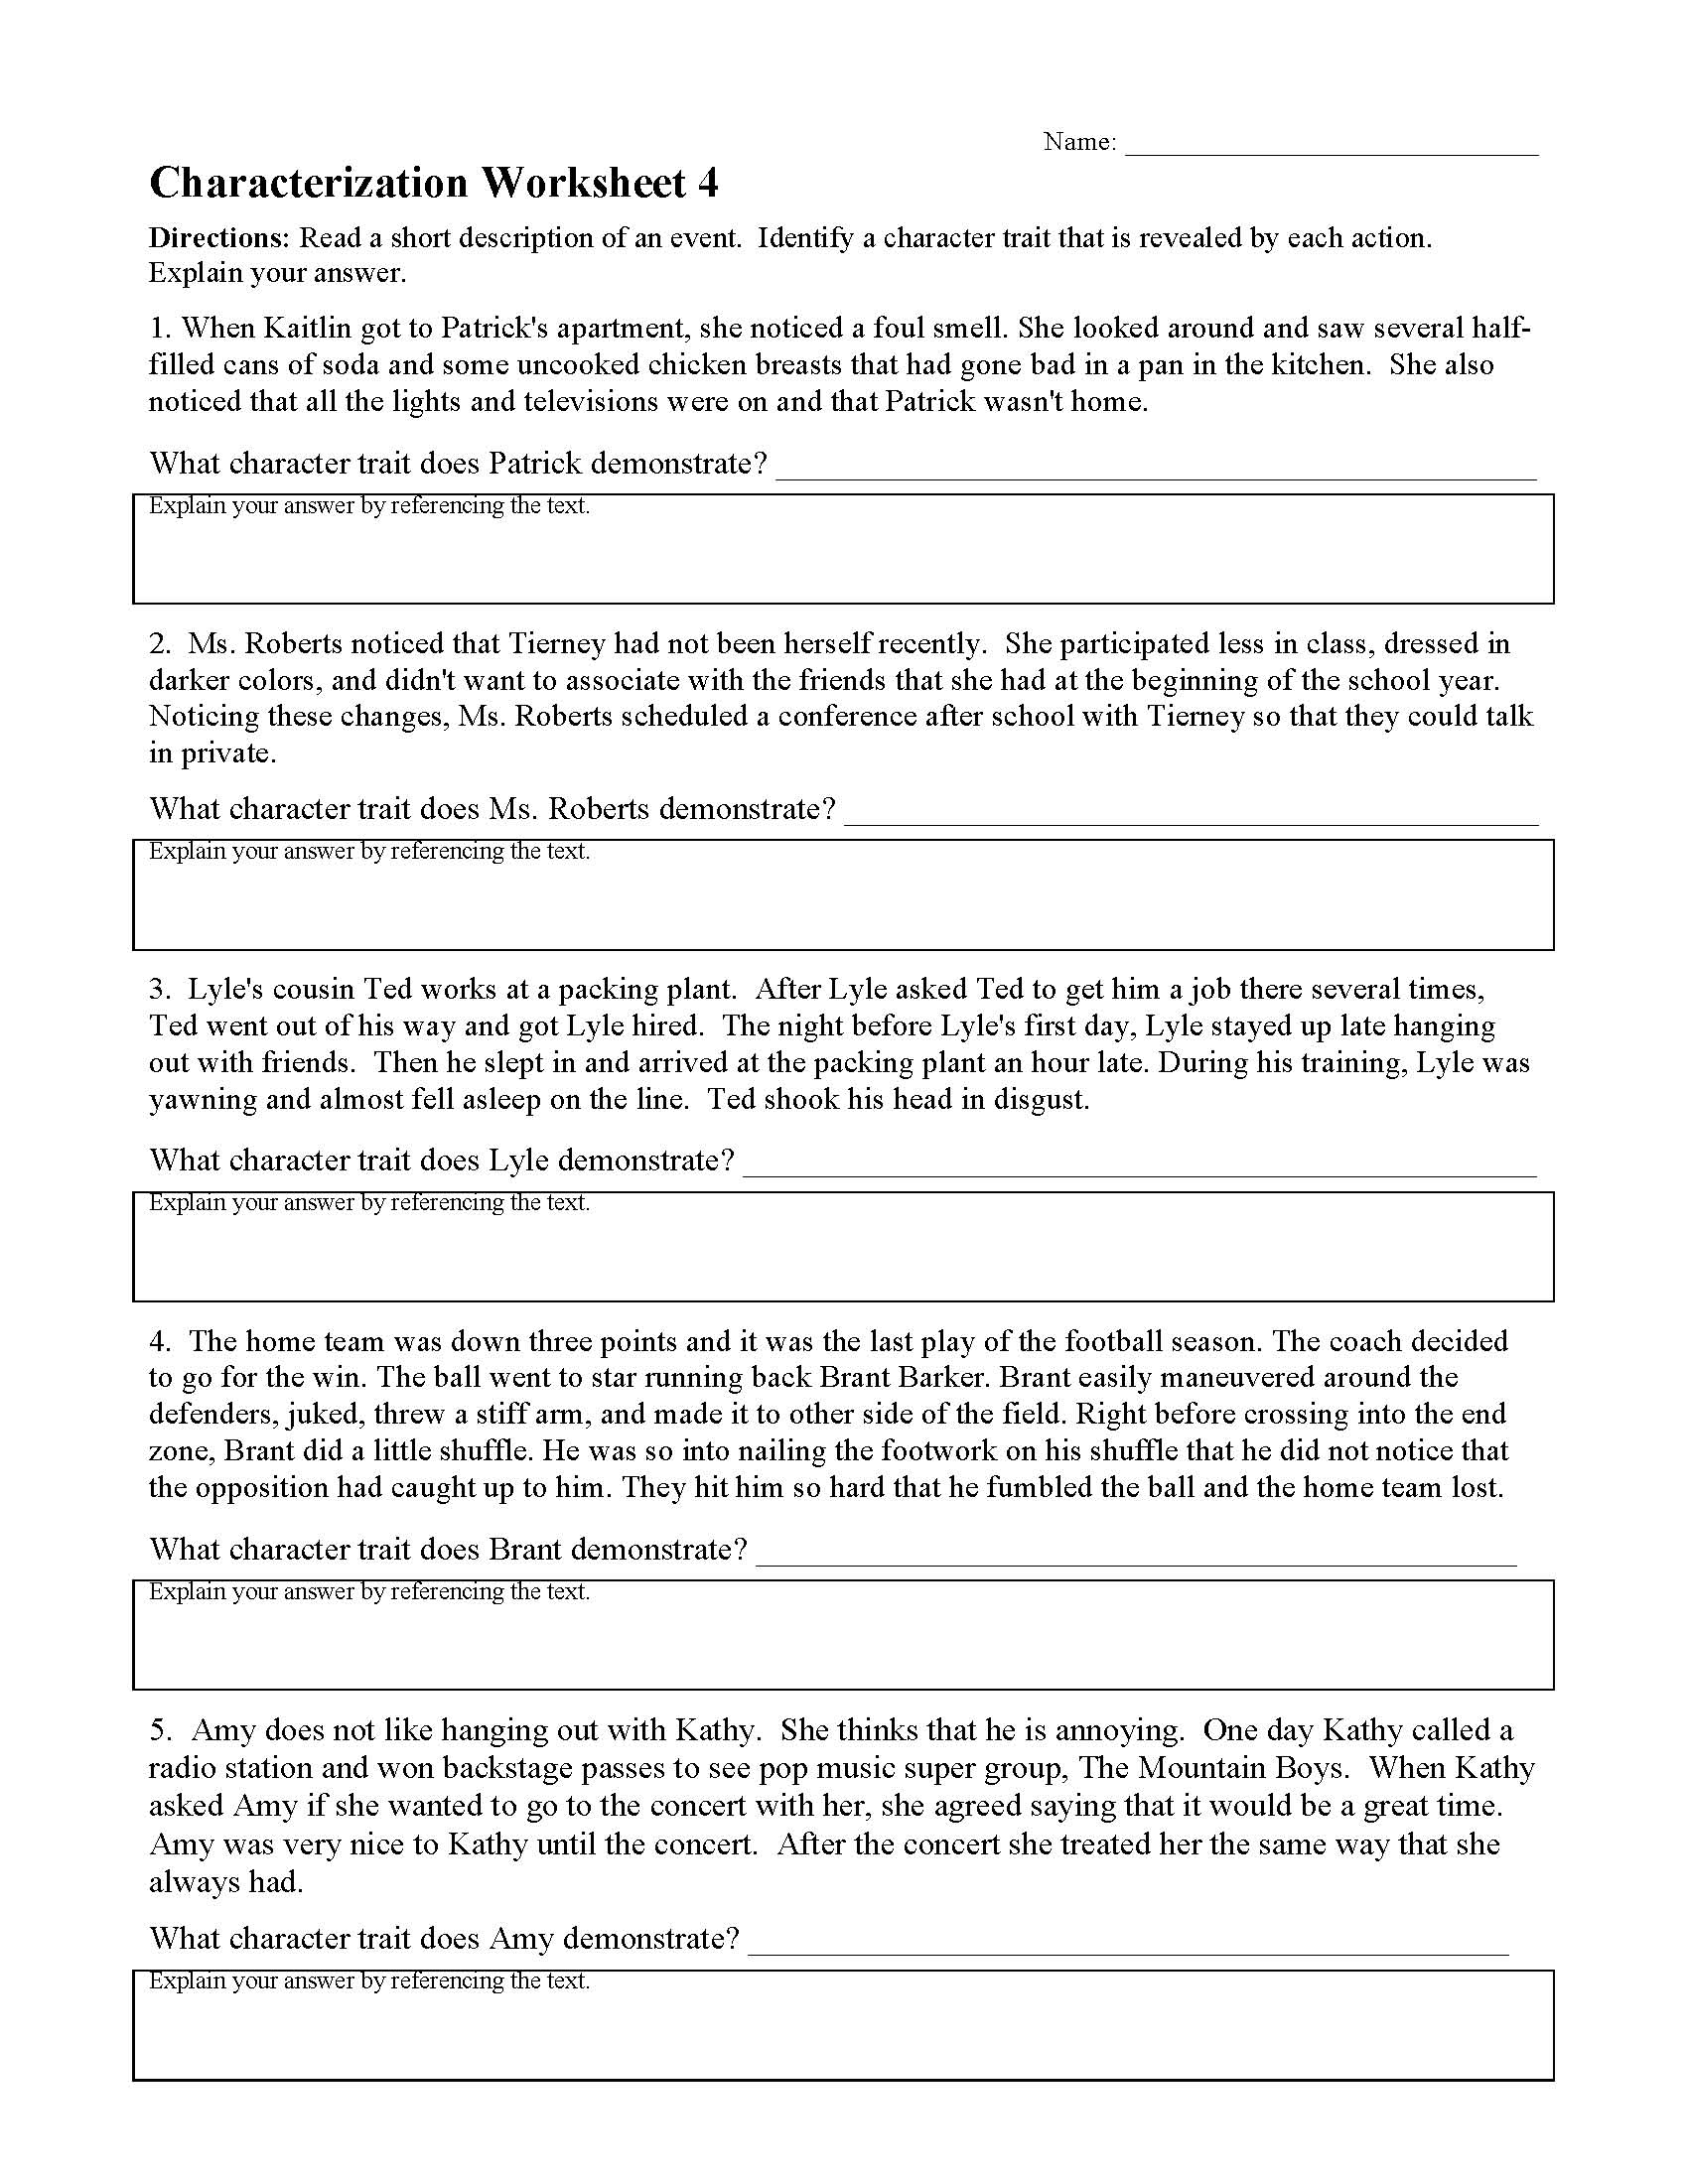 Characterization Worksheets  Ereading Worksheets Intended For Direct And Indirect Characterization Worksheet